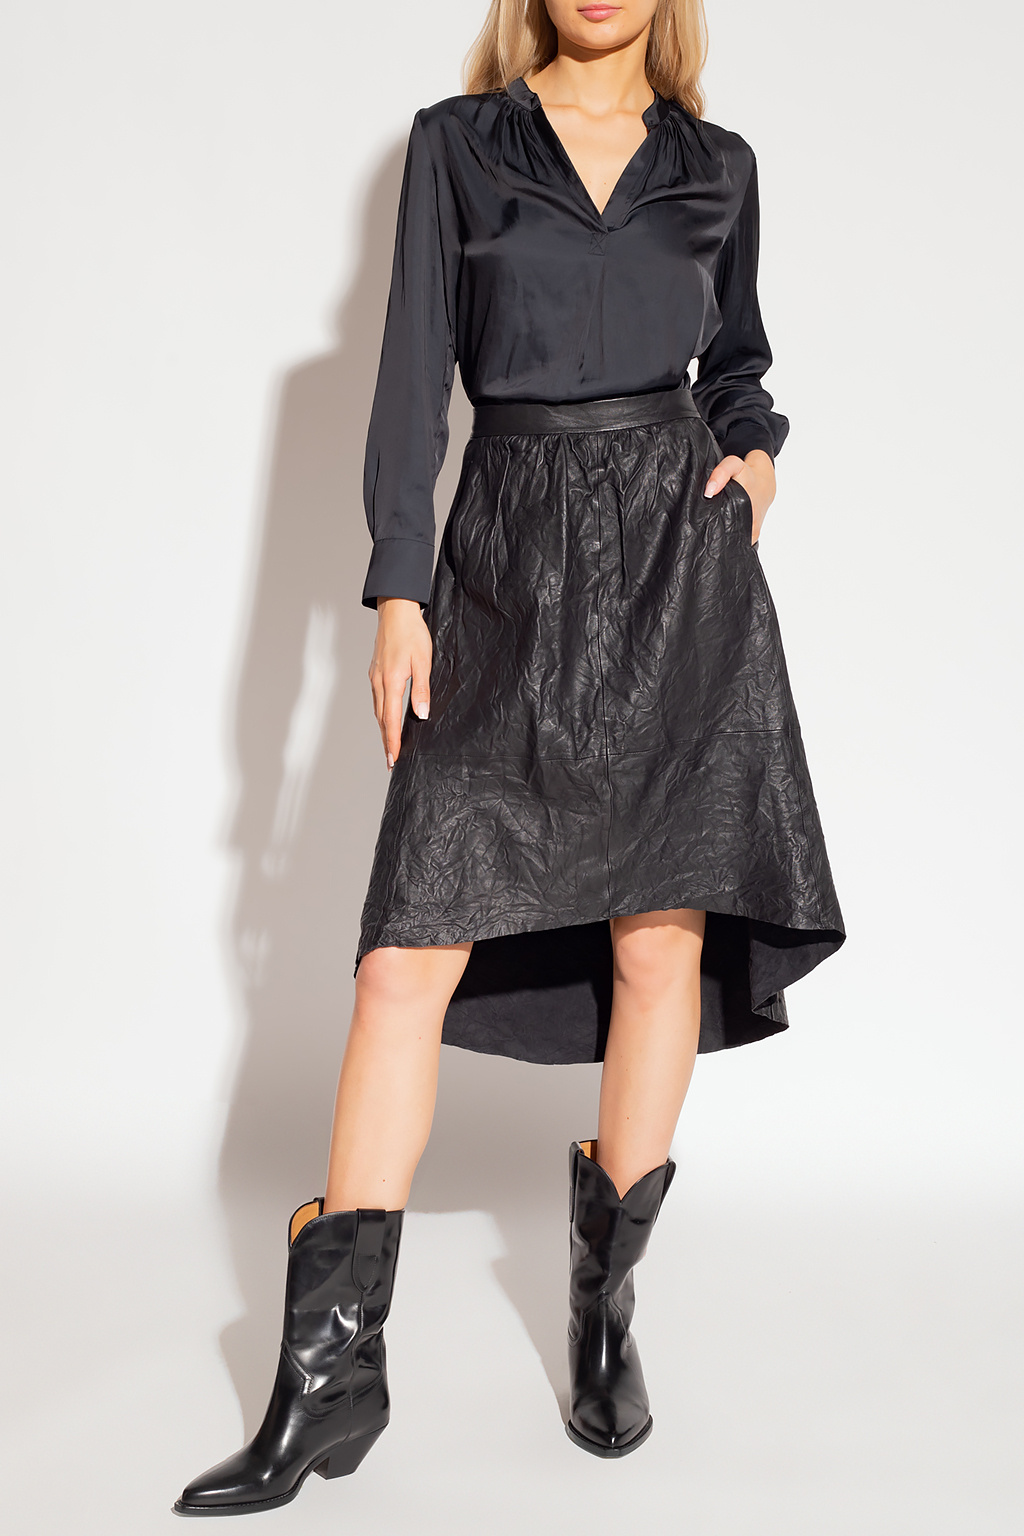 Zadig & Voltaire ‘Josilyn’ leather skirt